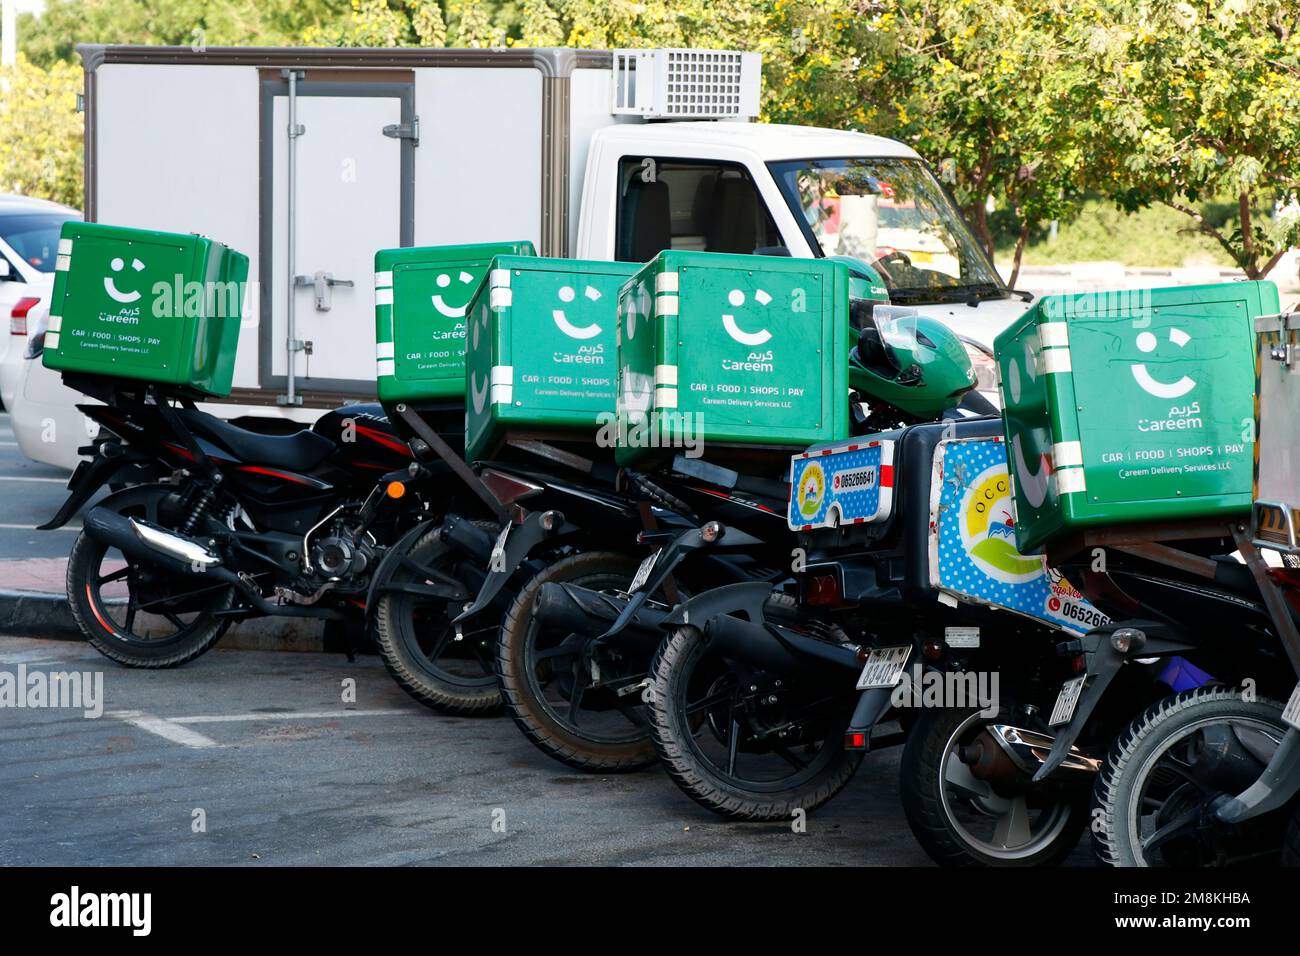 Food home delivery service motorcycles waiting for online order at parking lot Stock Photo